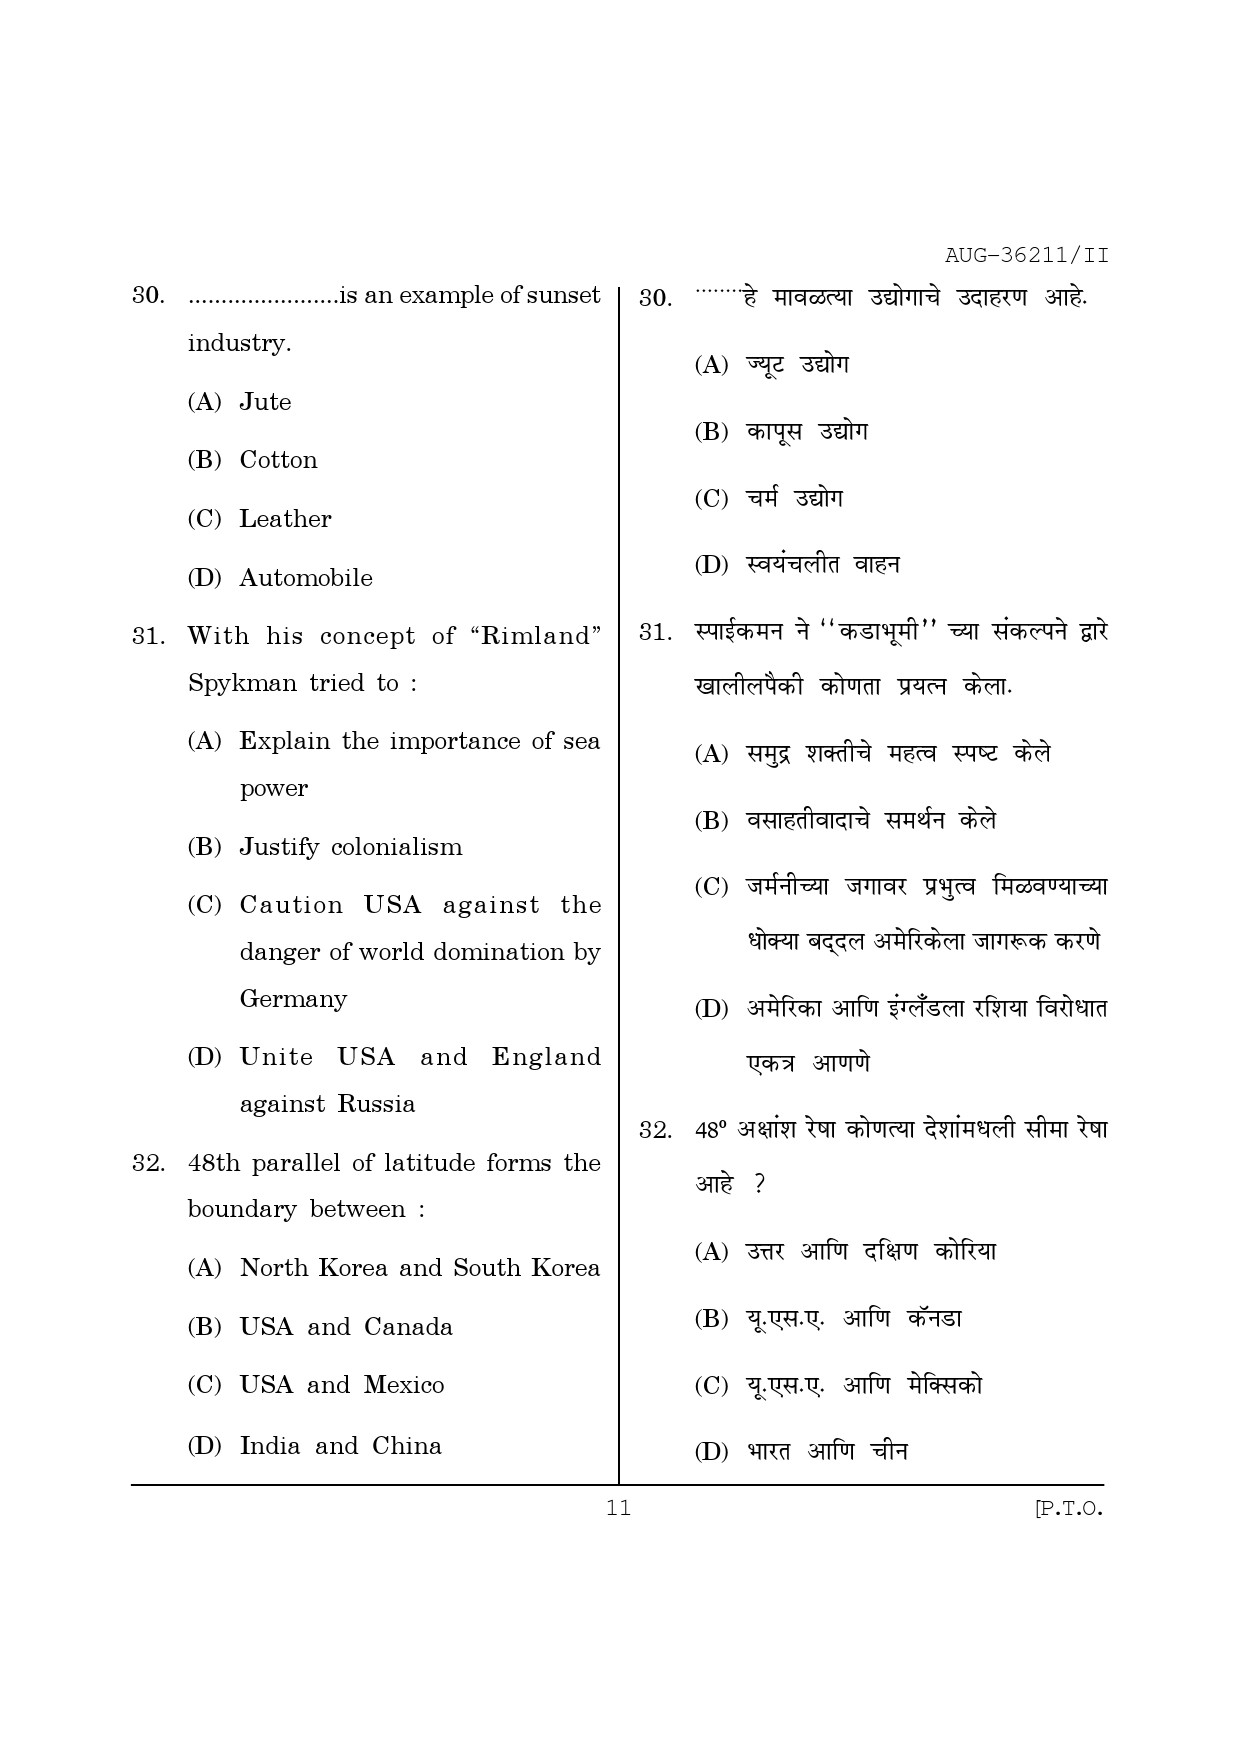 Maharashtra SET Geography Question Paper II August 2011 11